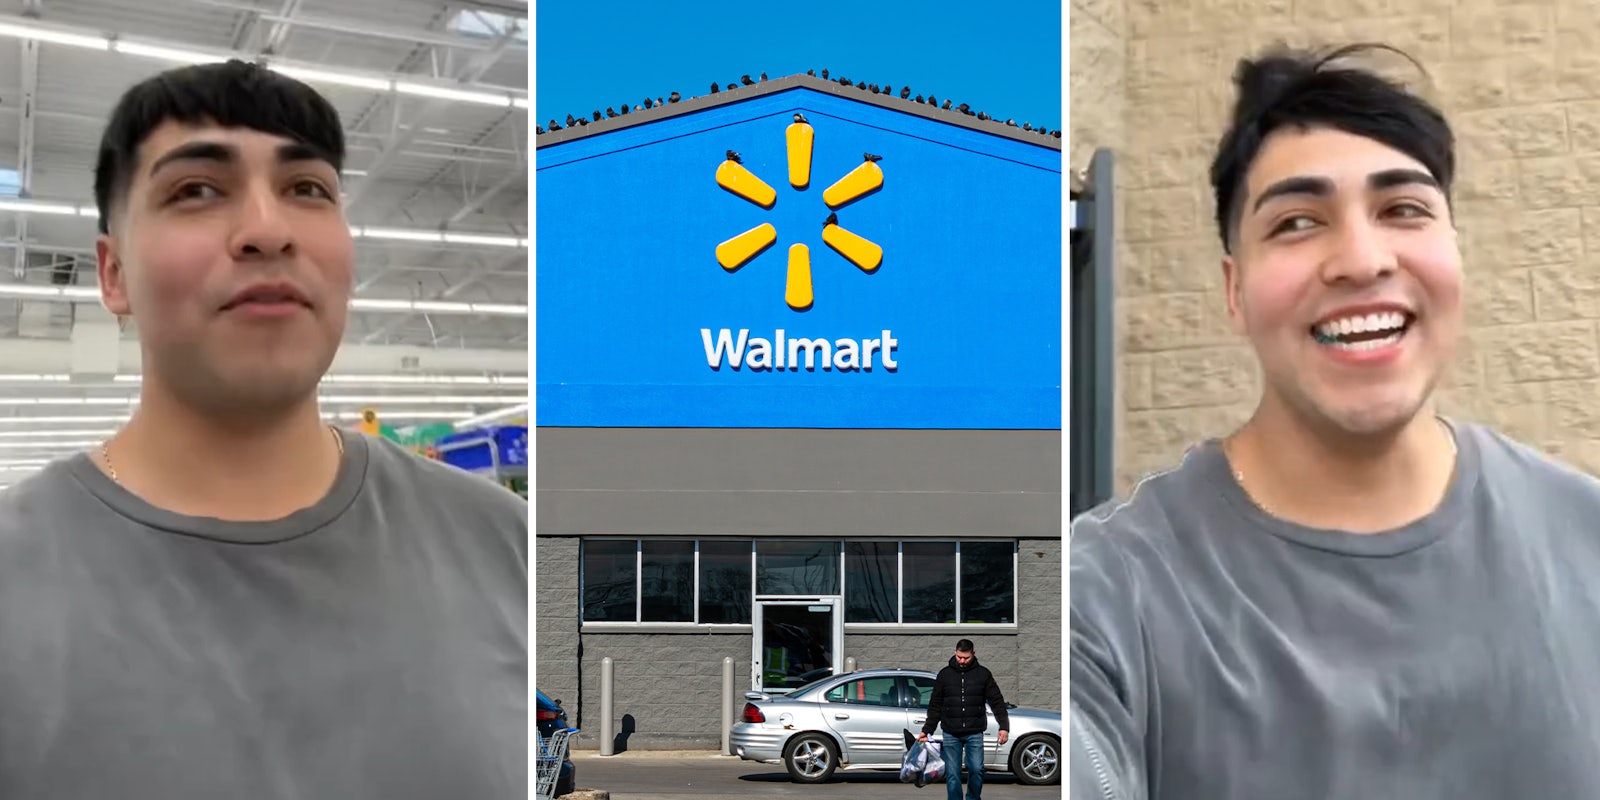 Walmart Worker Says He Feels 'Free' After Being Fired From Job